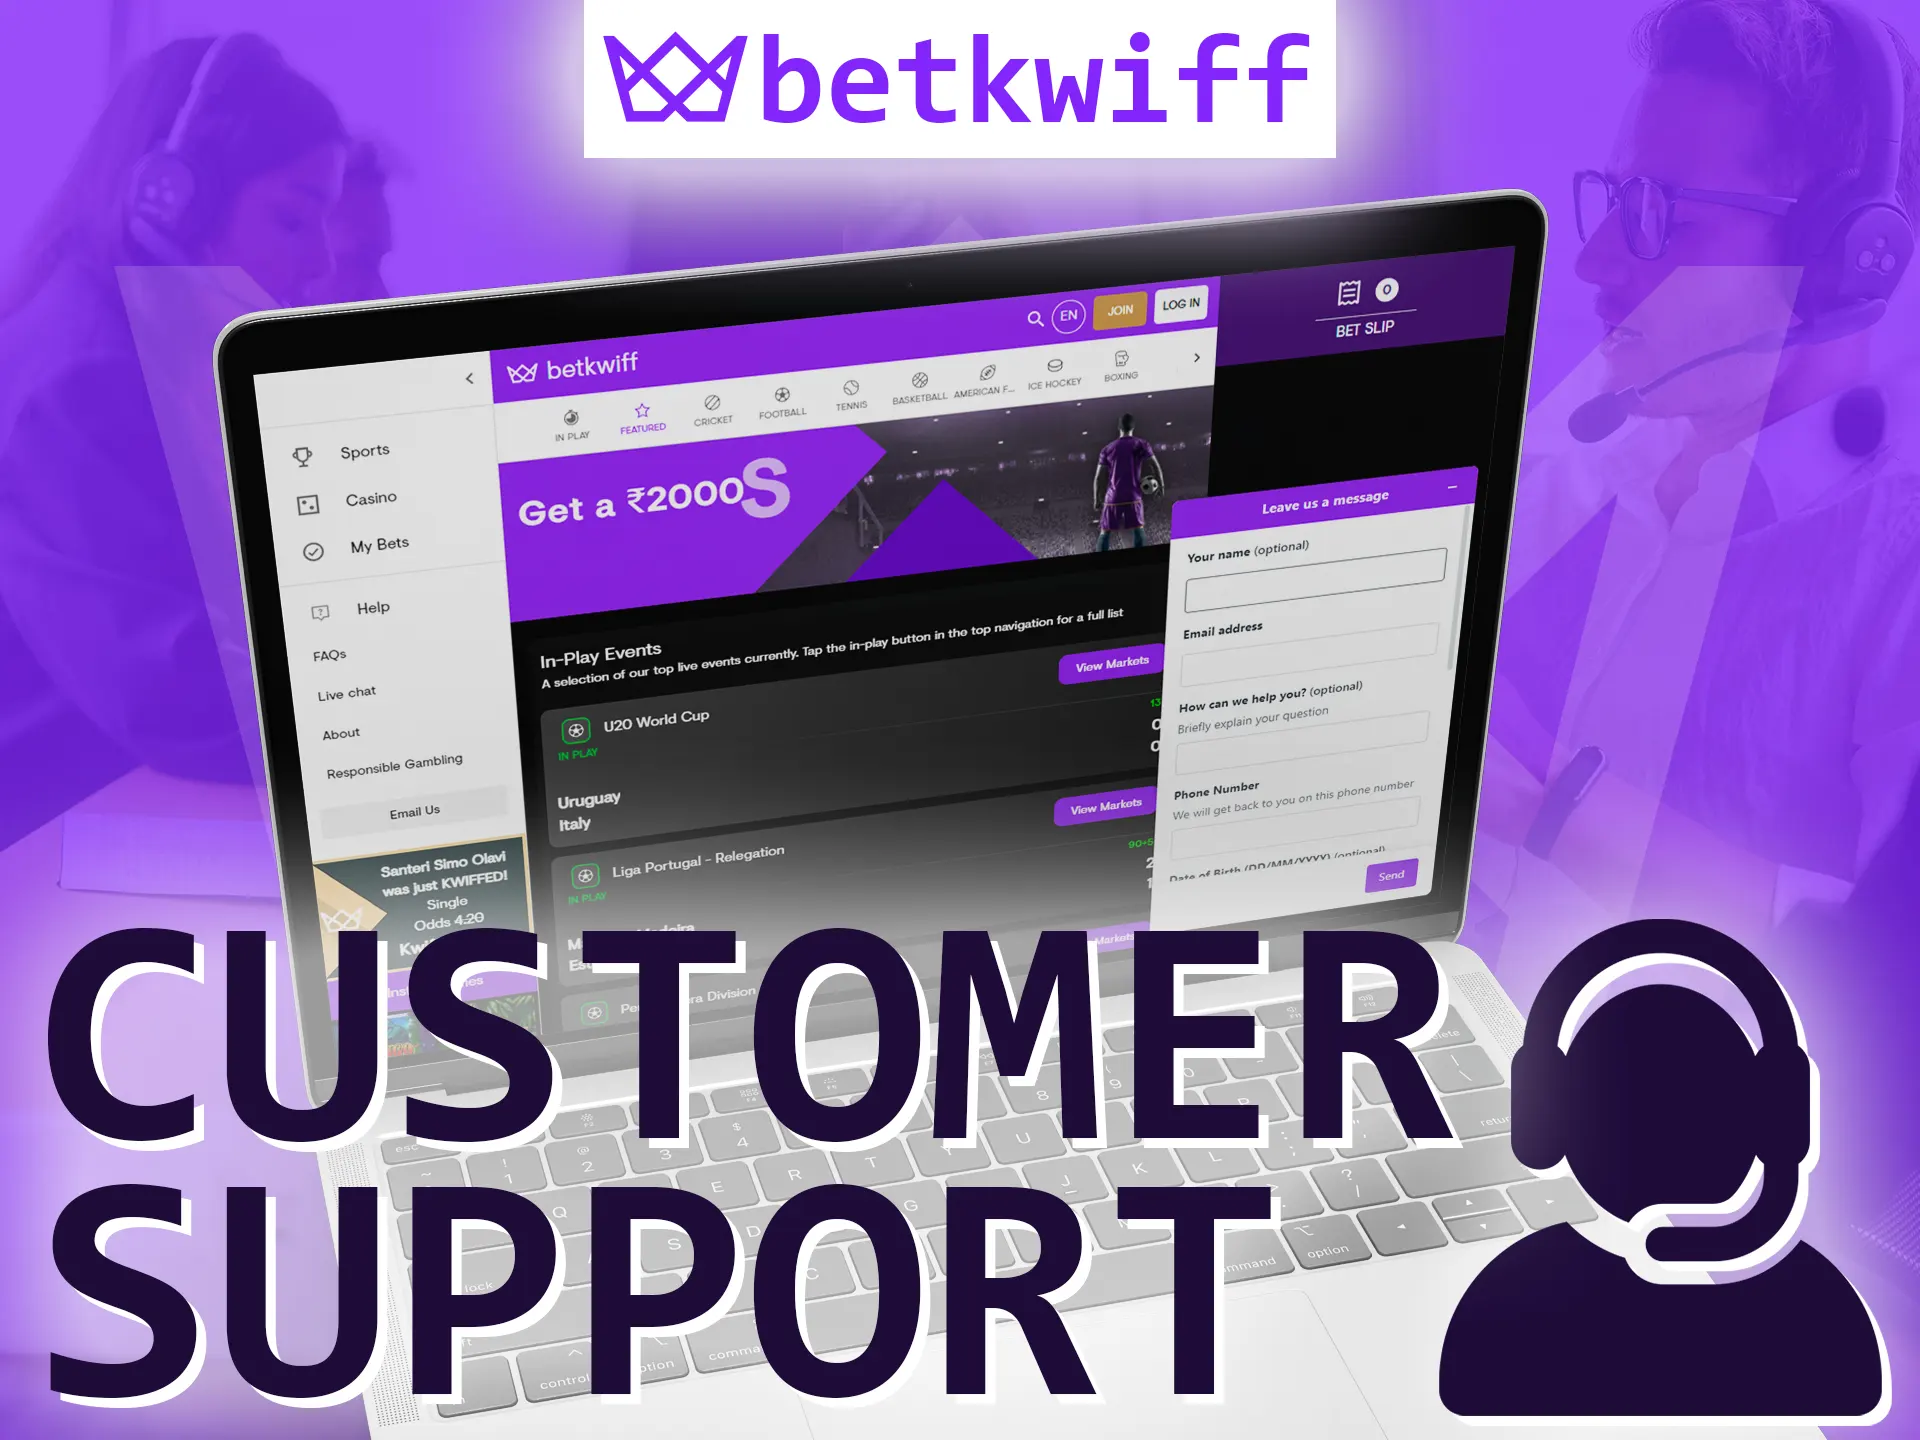 Betkwiff always gives its players support.